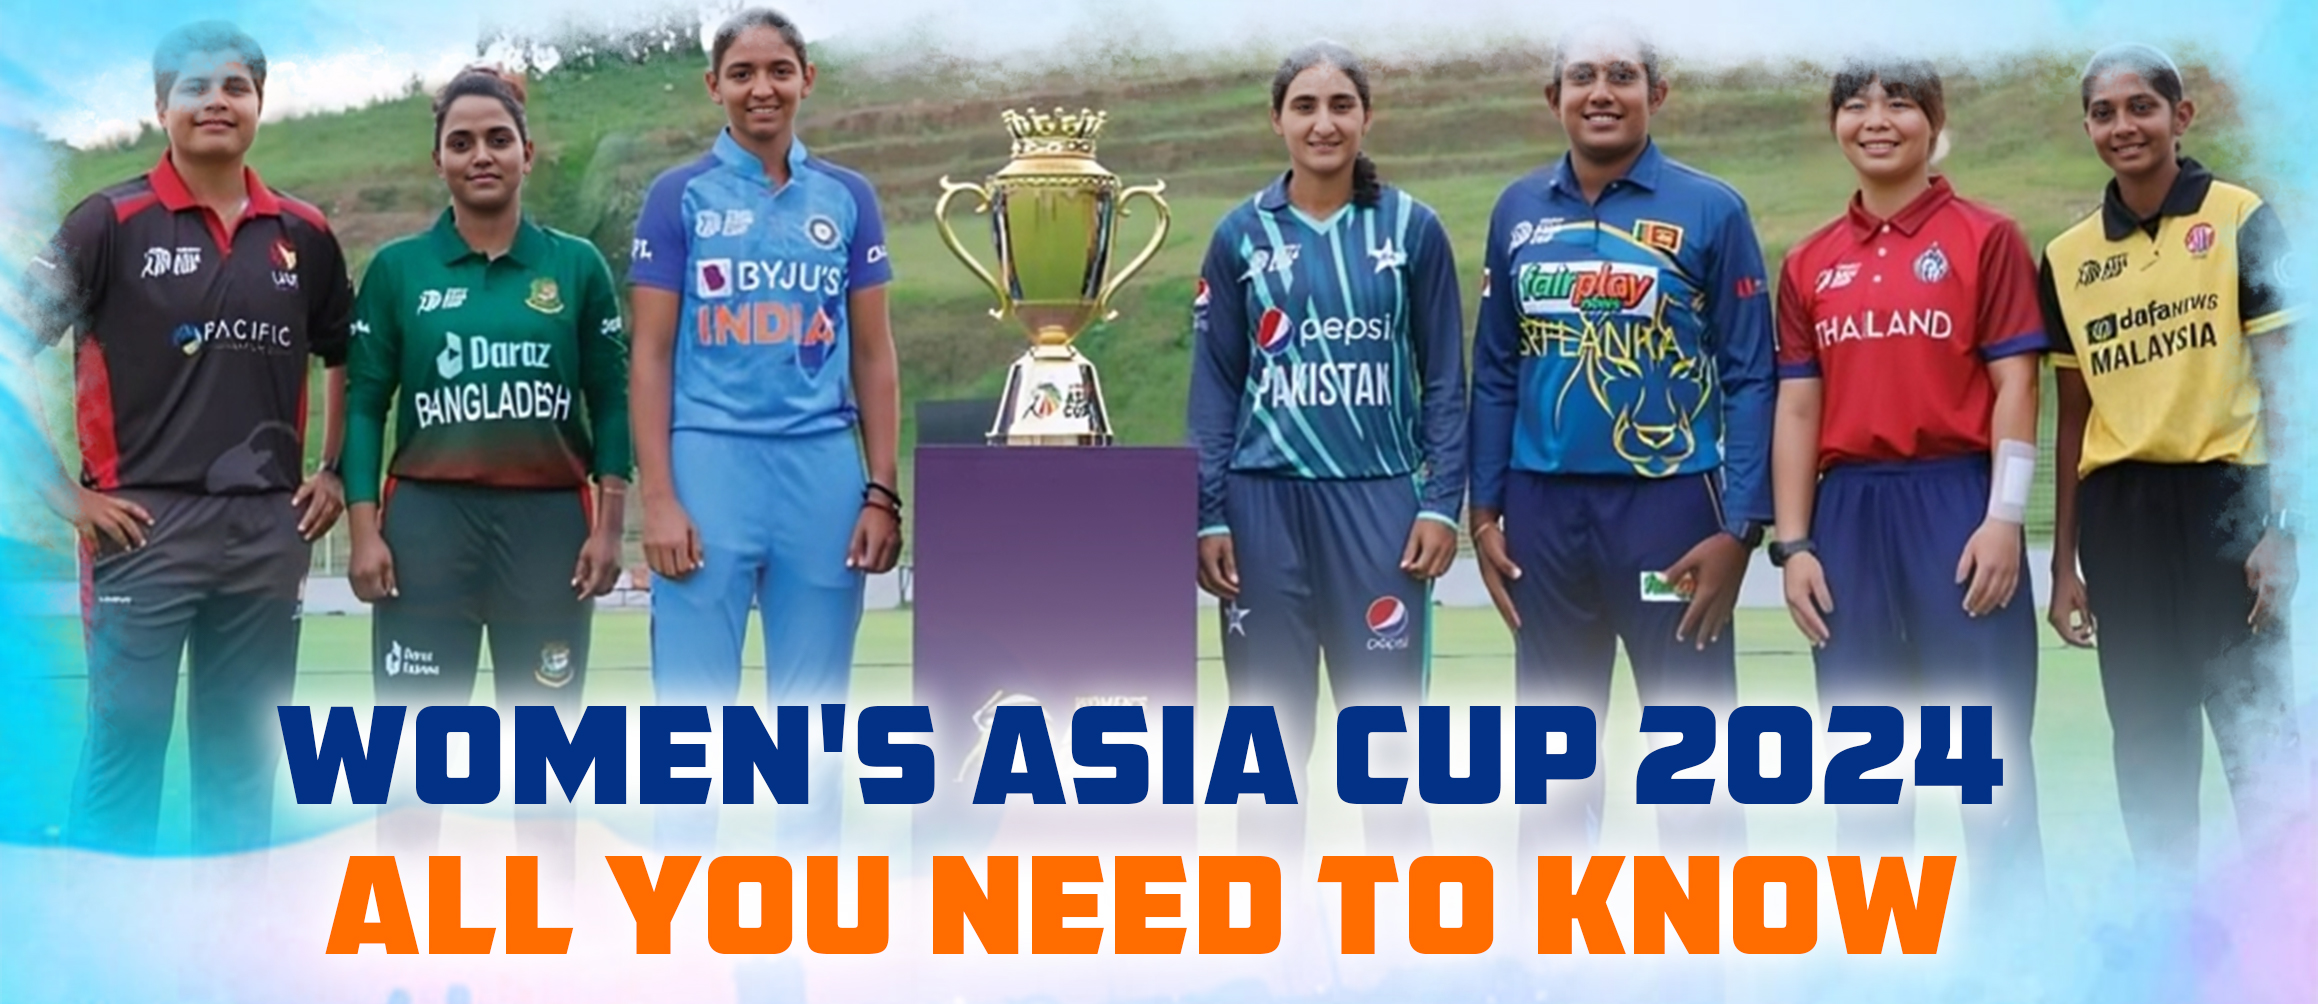 Women’s Asia Cup 2024: All You Need to Know